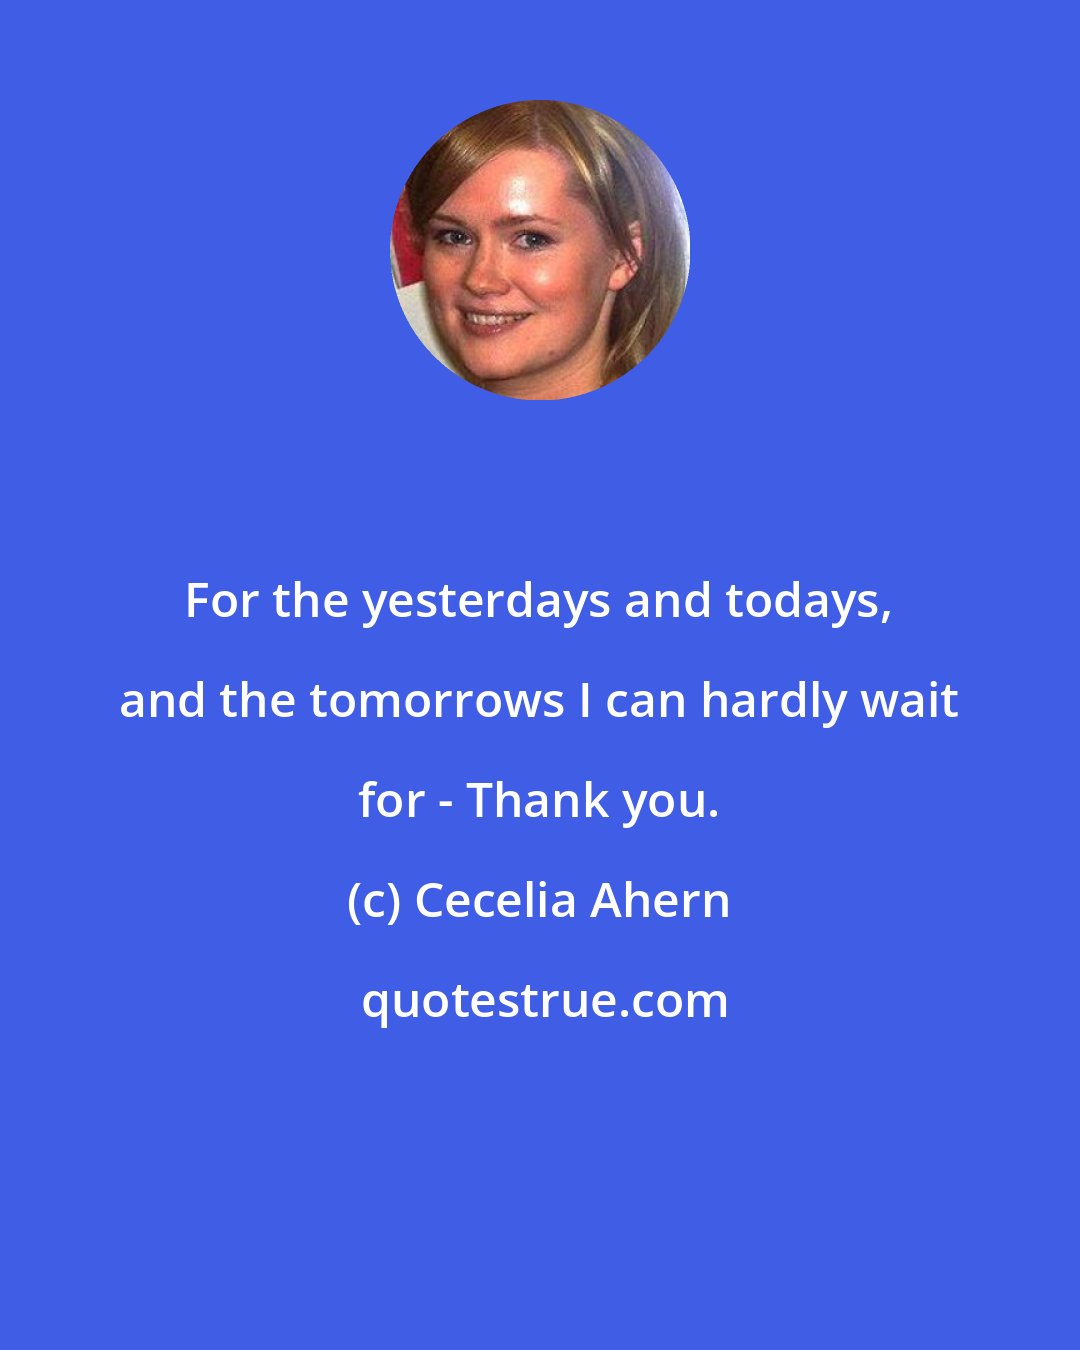 Cecelia Ahern: For the yesterdays and todays, and the tomorrows I can hardly wait for - Thank you.